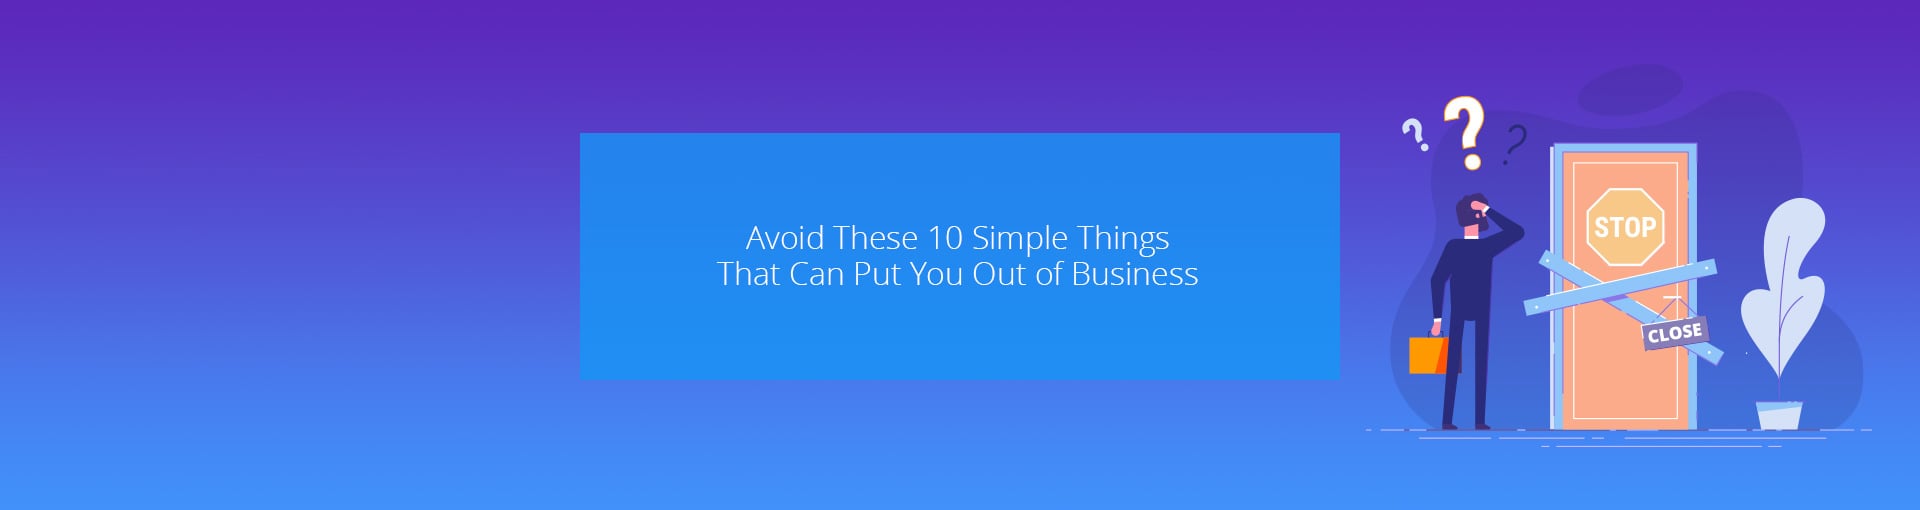 Avoid These 10 Simple Things that Can Put You Out of Business Featured Image